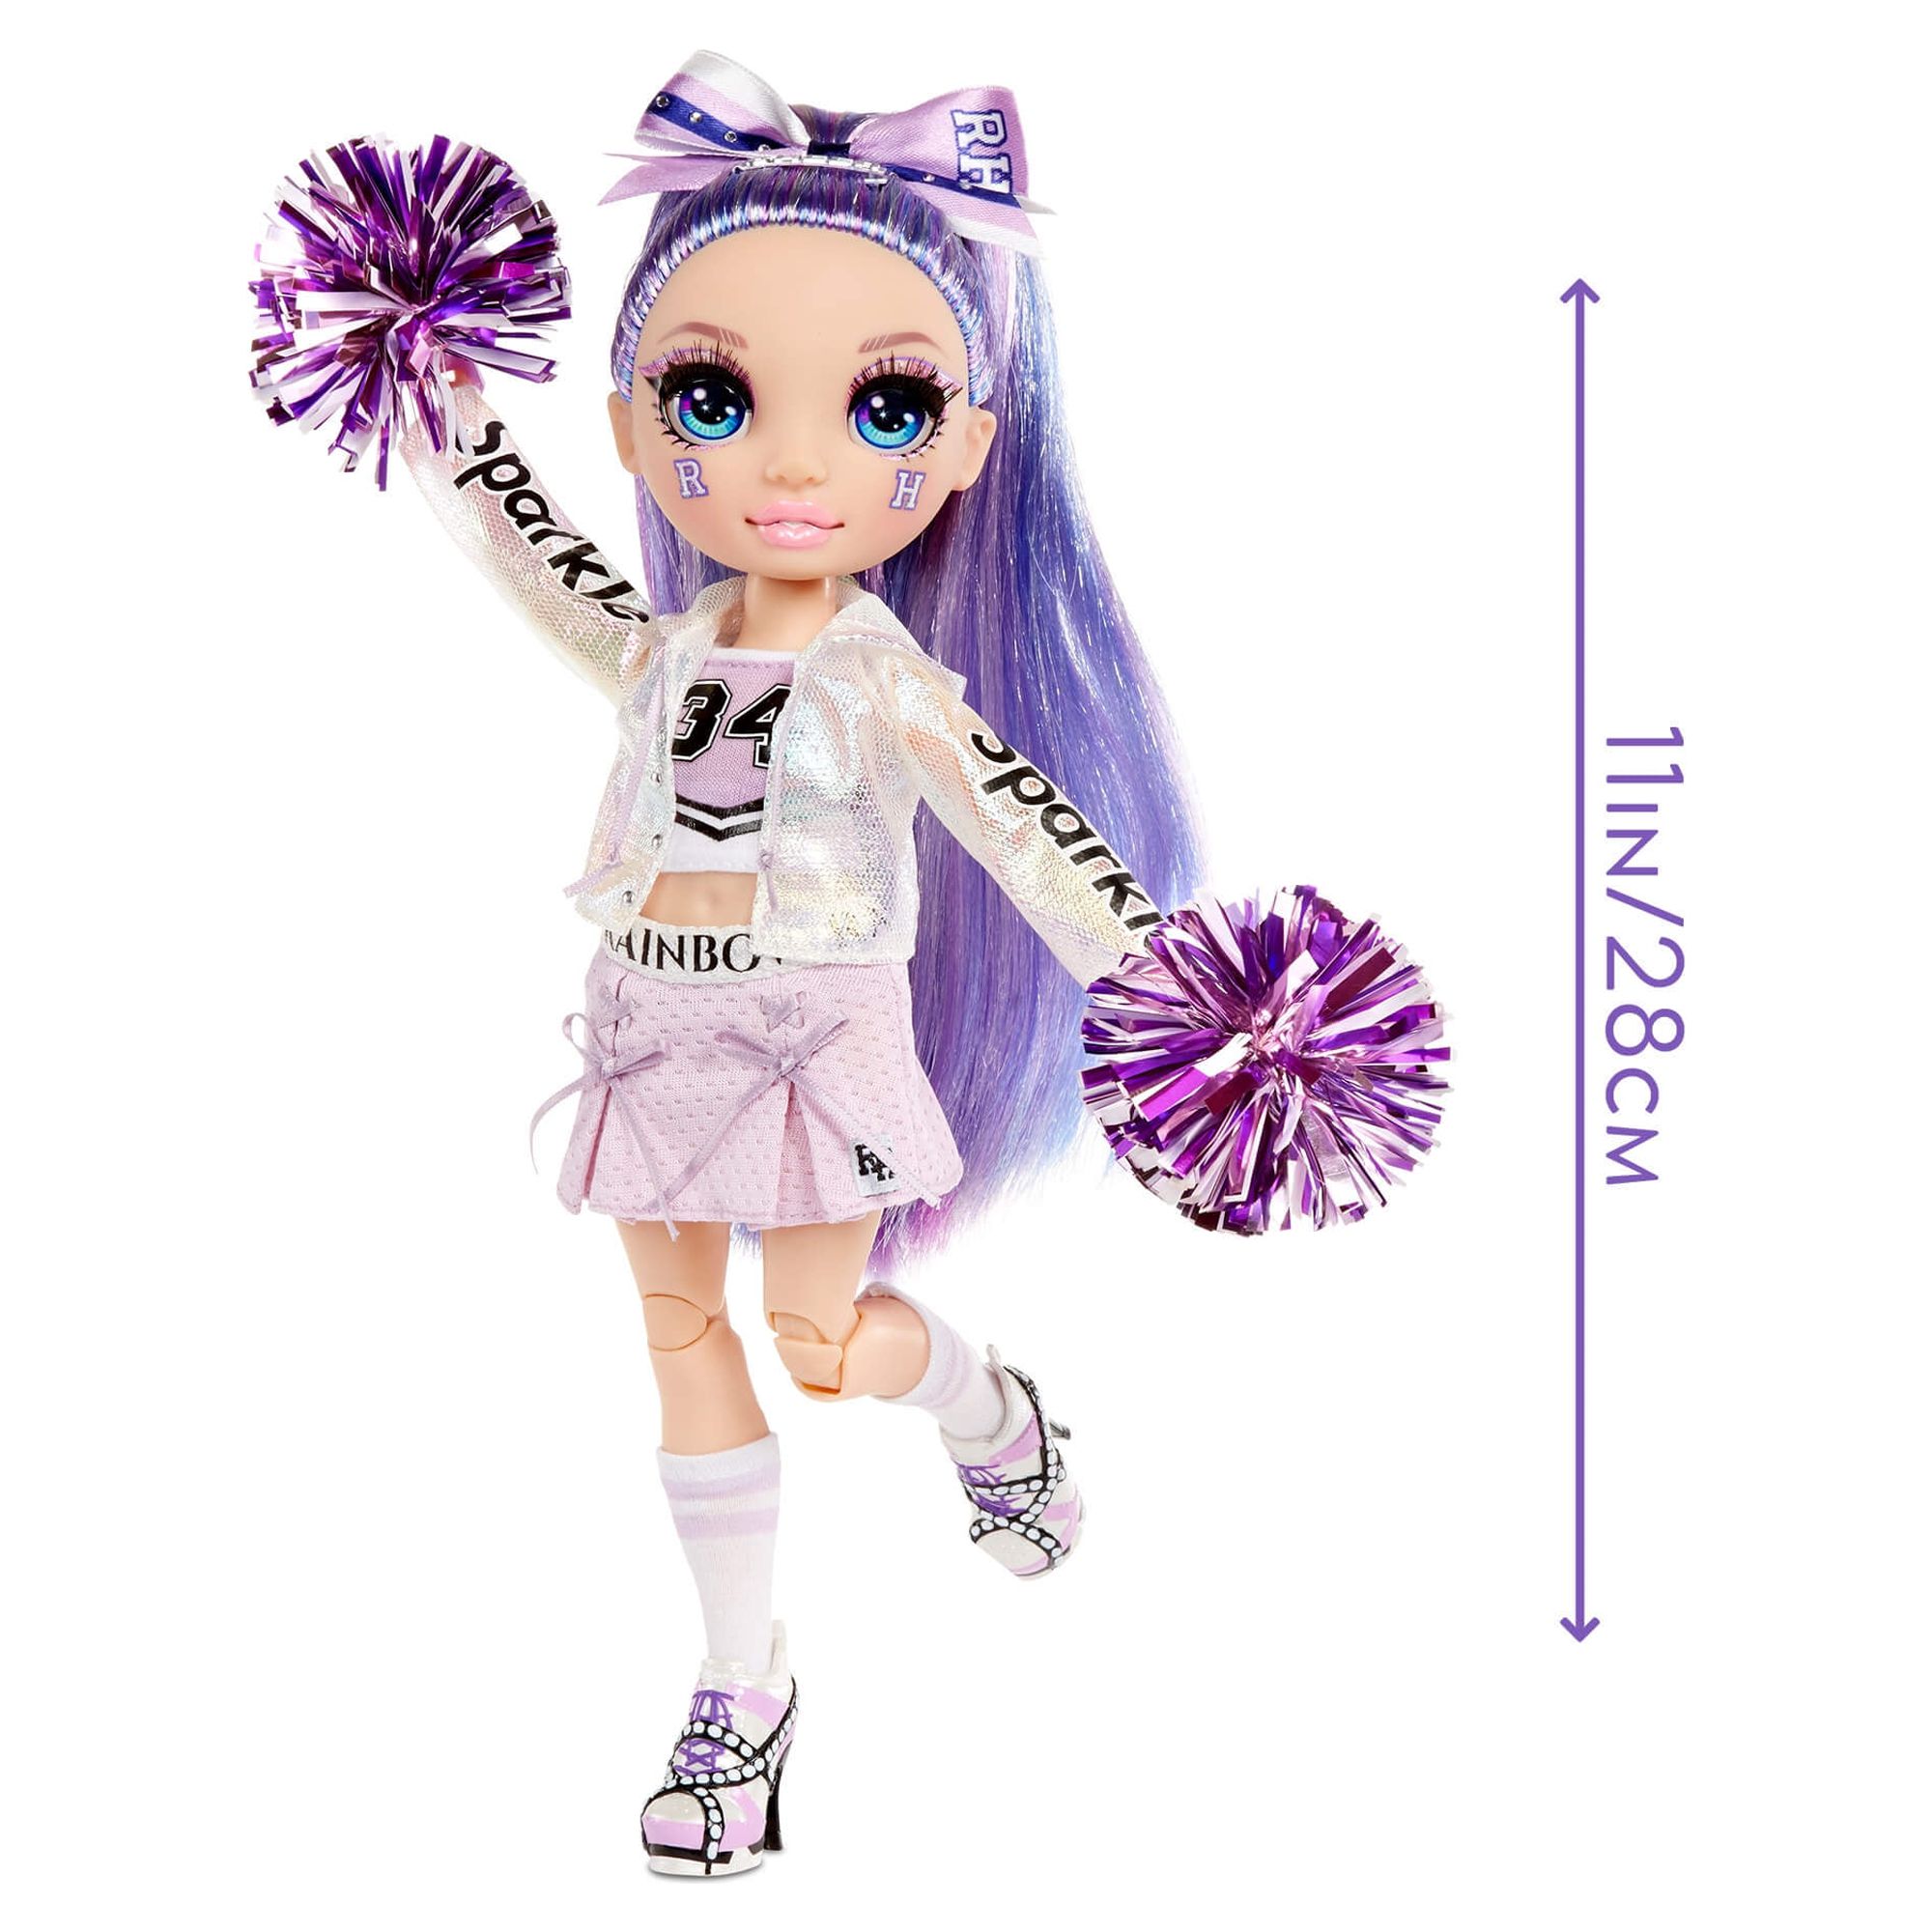 Rainbow High Cheer Violet Willow – Purple Fashion Doll with Pom Poms, Cheerleader Doll, Toys for Kids 6-12 Years Old - image 5 of 8